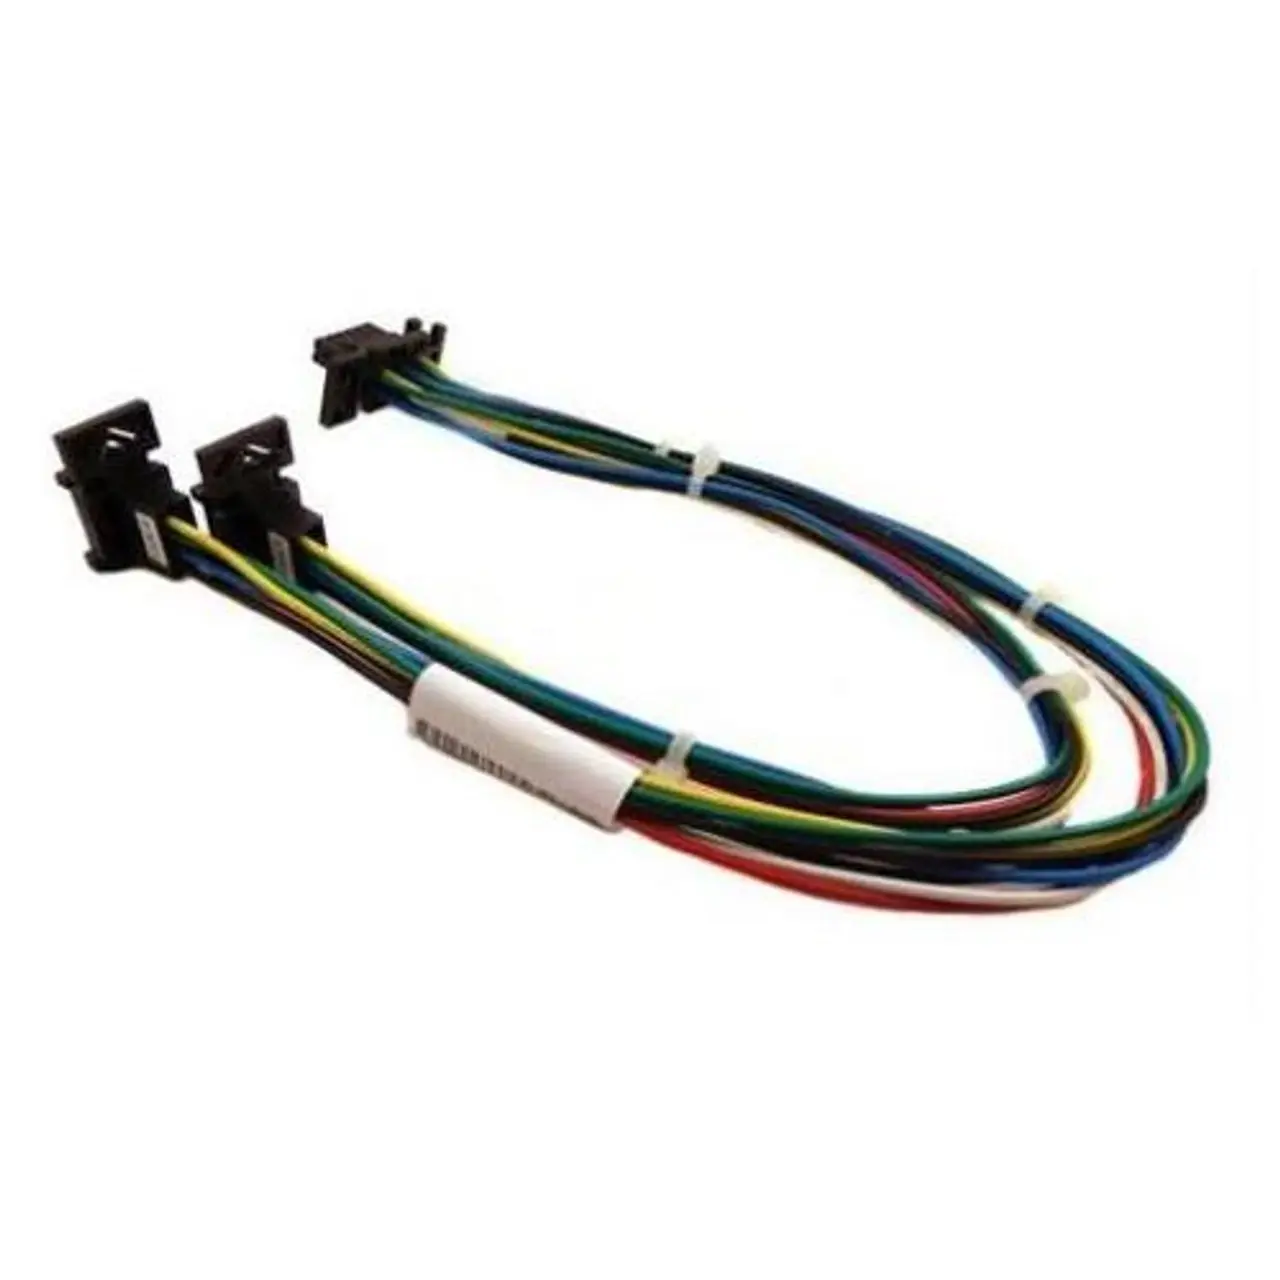 A5862-63001 HP Cable Assembly for XMIOB Bridge